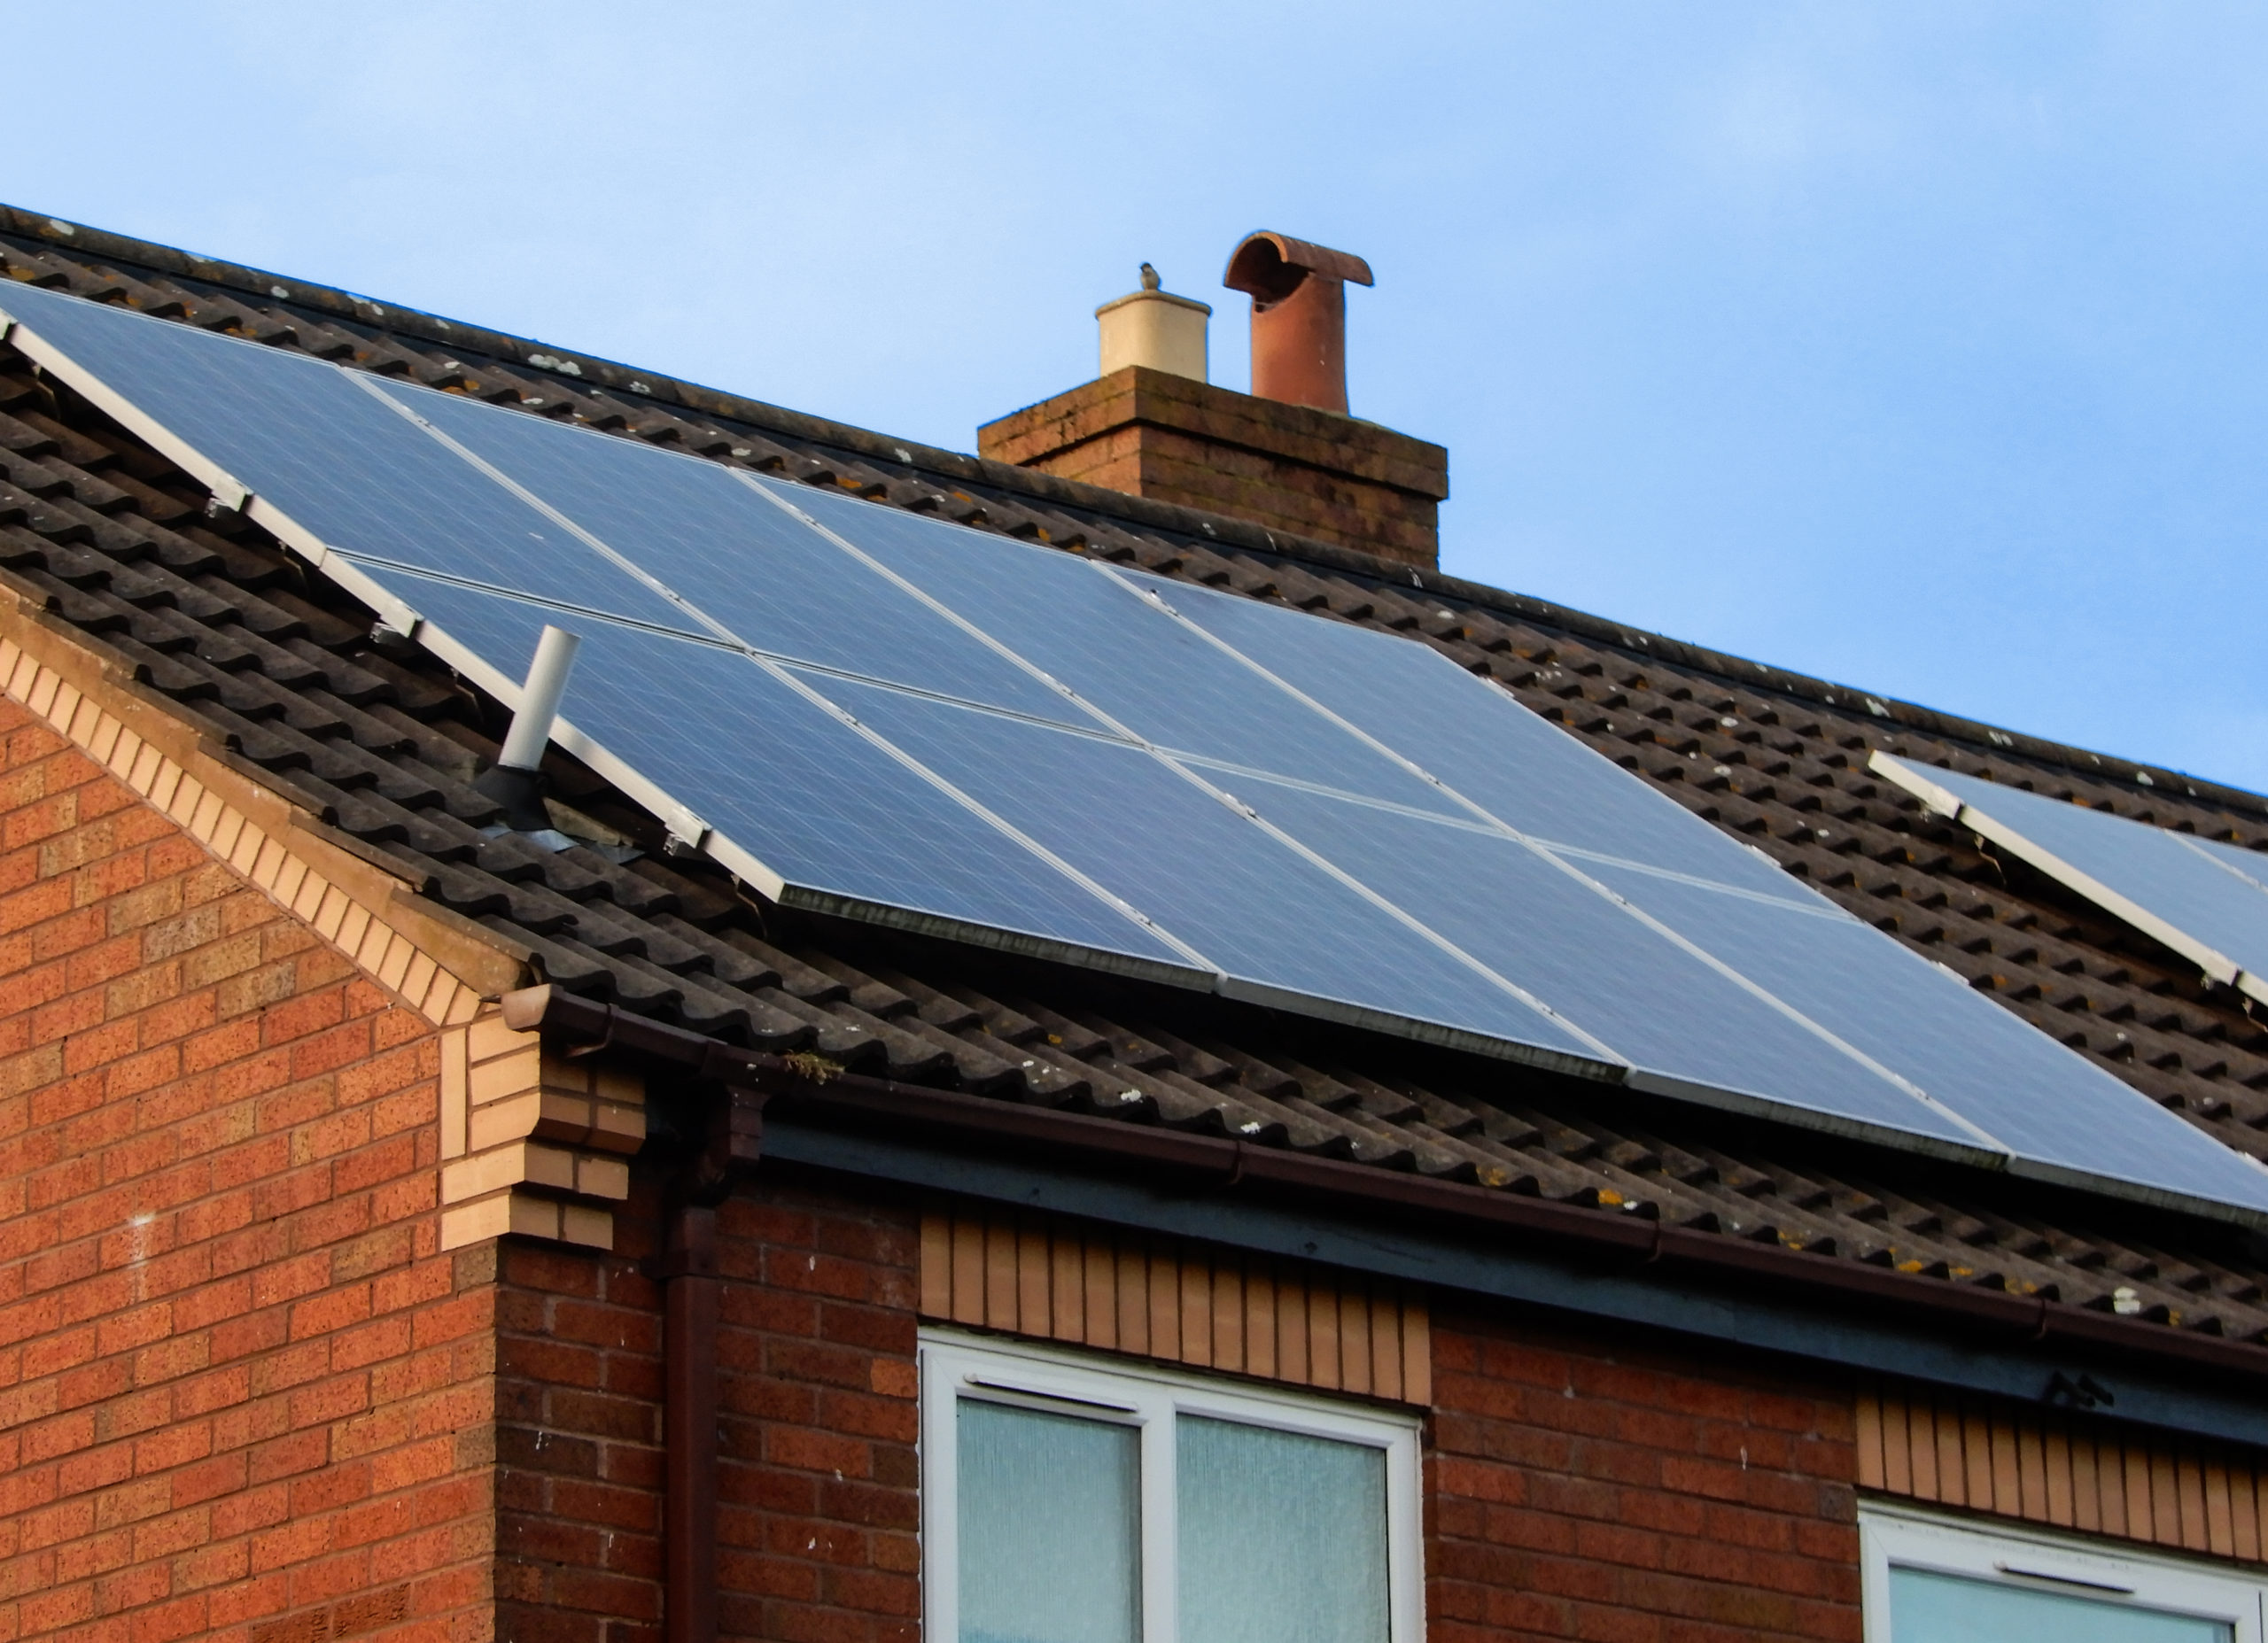 Solar panels mounted on a house roof as part of a retrofit